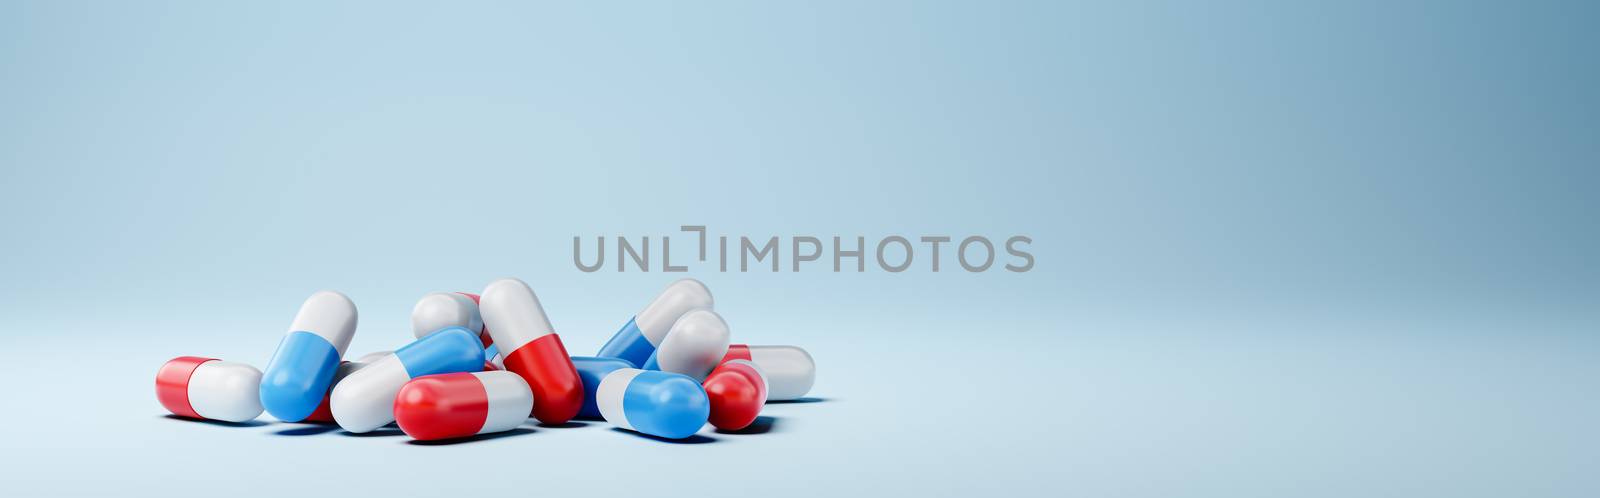 Pile of Red and Blue Pills on Blue Background with Copy Space 3D Illustration